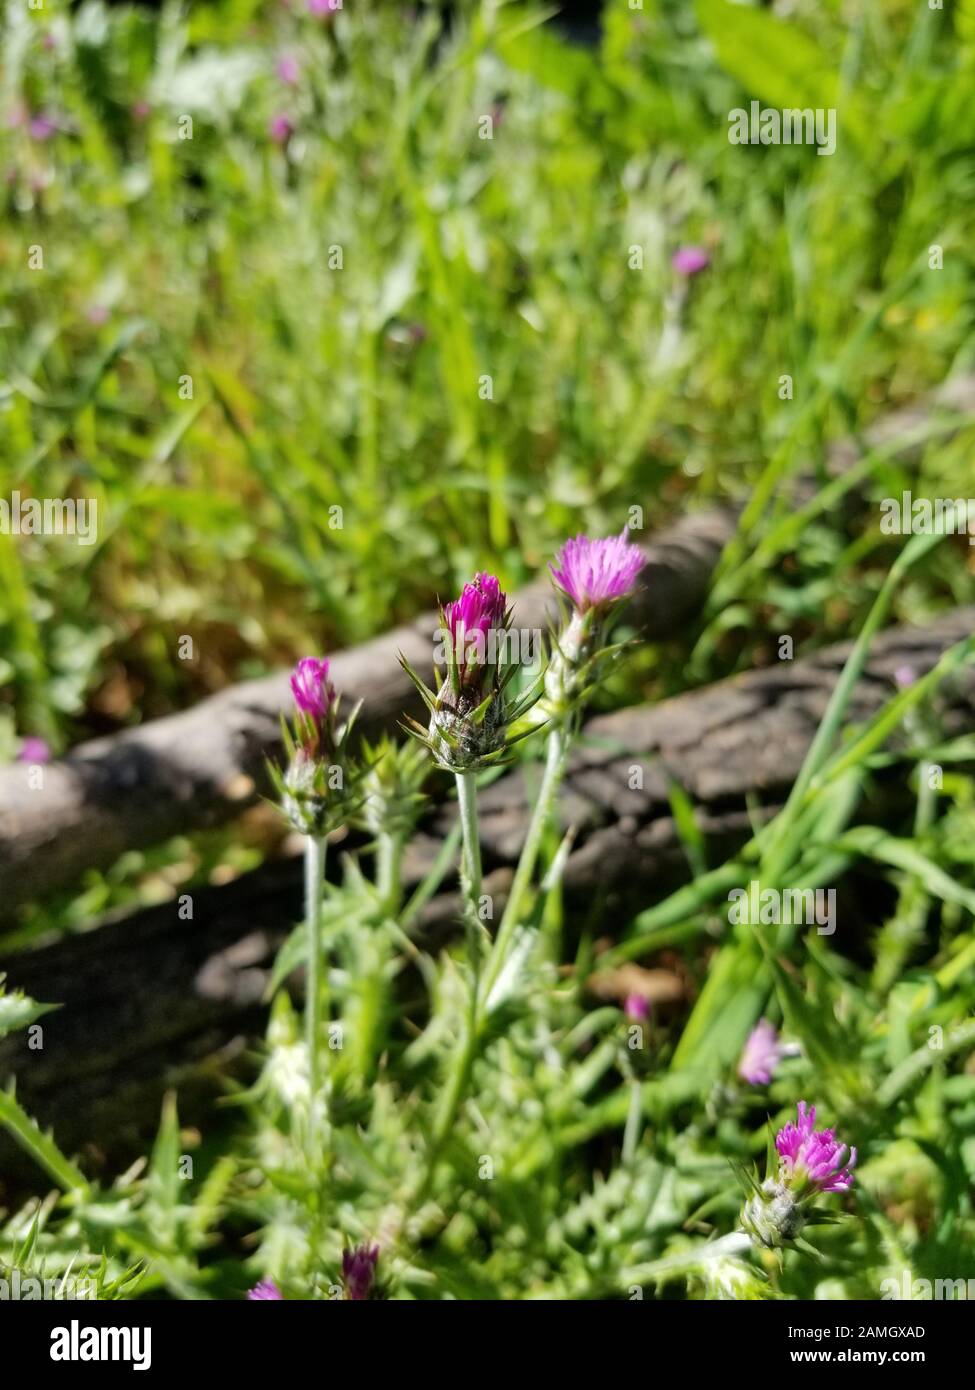 Close-up of wild Carduus pycnocephalus (Italian Thistle) plant growing outdoors in Lafayette, California, April 9, 2019. () Stock Photo